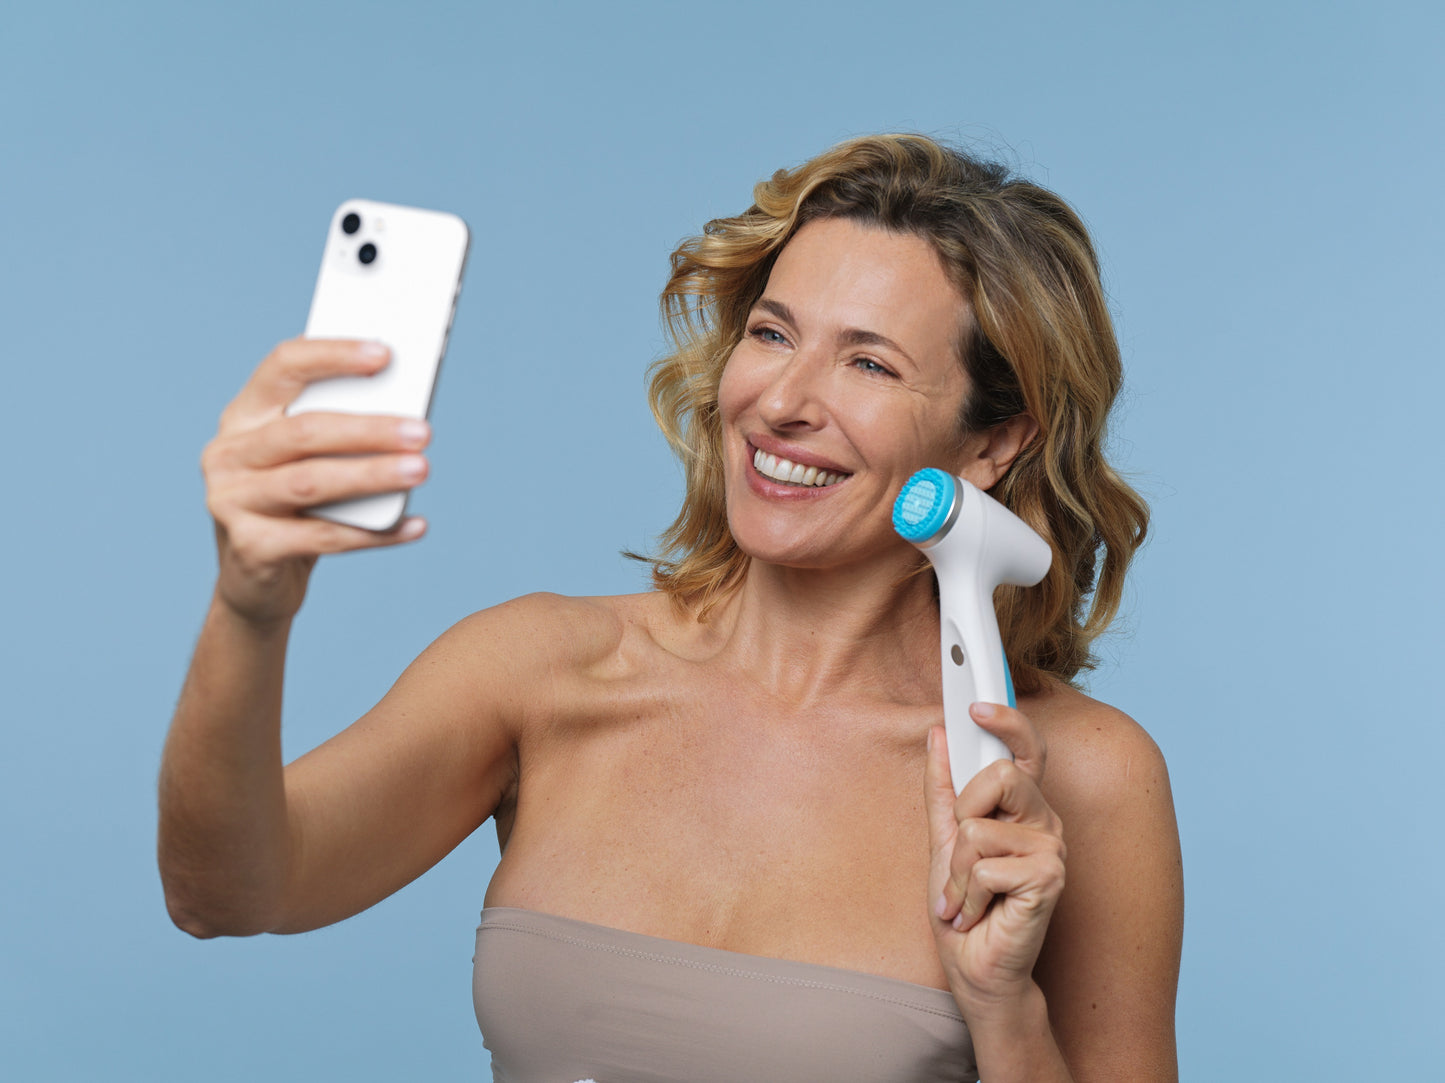 Customer holds LumiSpa iO and cell phone - LumiSpa iO you can connect via Blutetooth with the Nu Skin Vera app on your cell phone to help you reach your grooming goals with intelligent IoT-technology (Internet of Things).